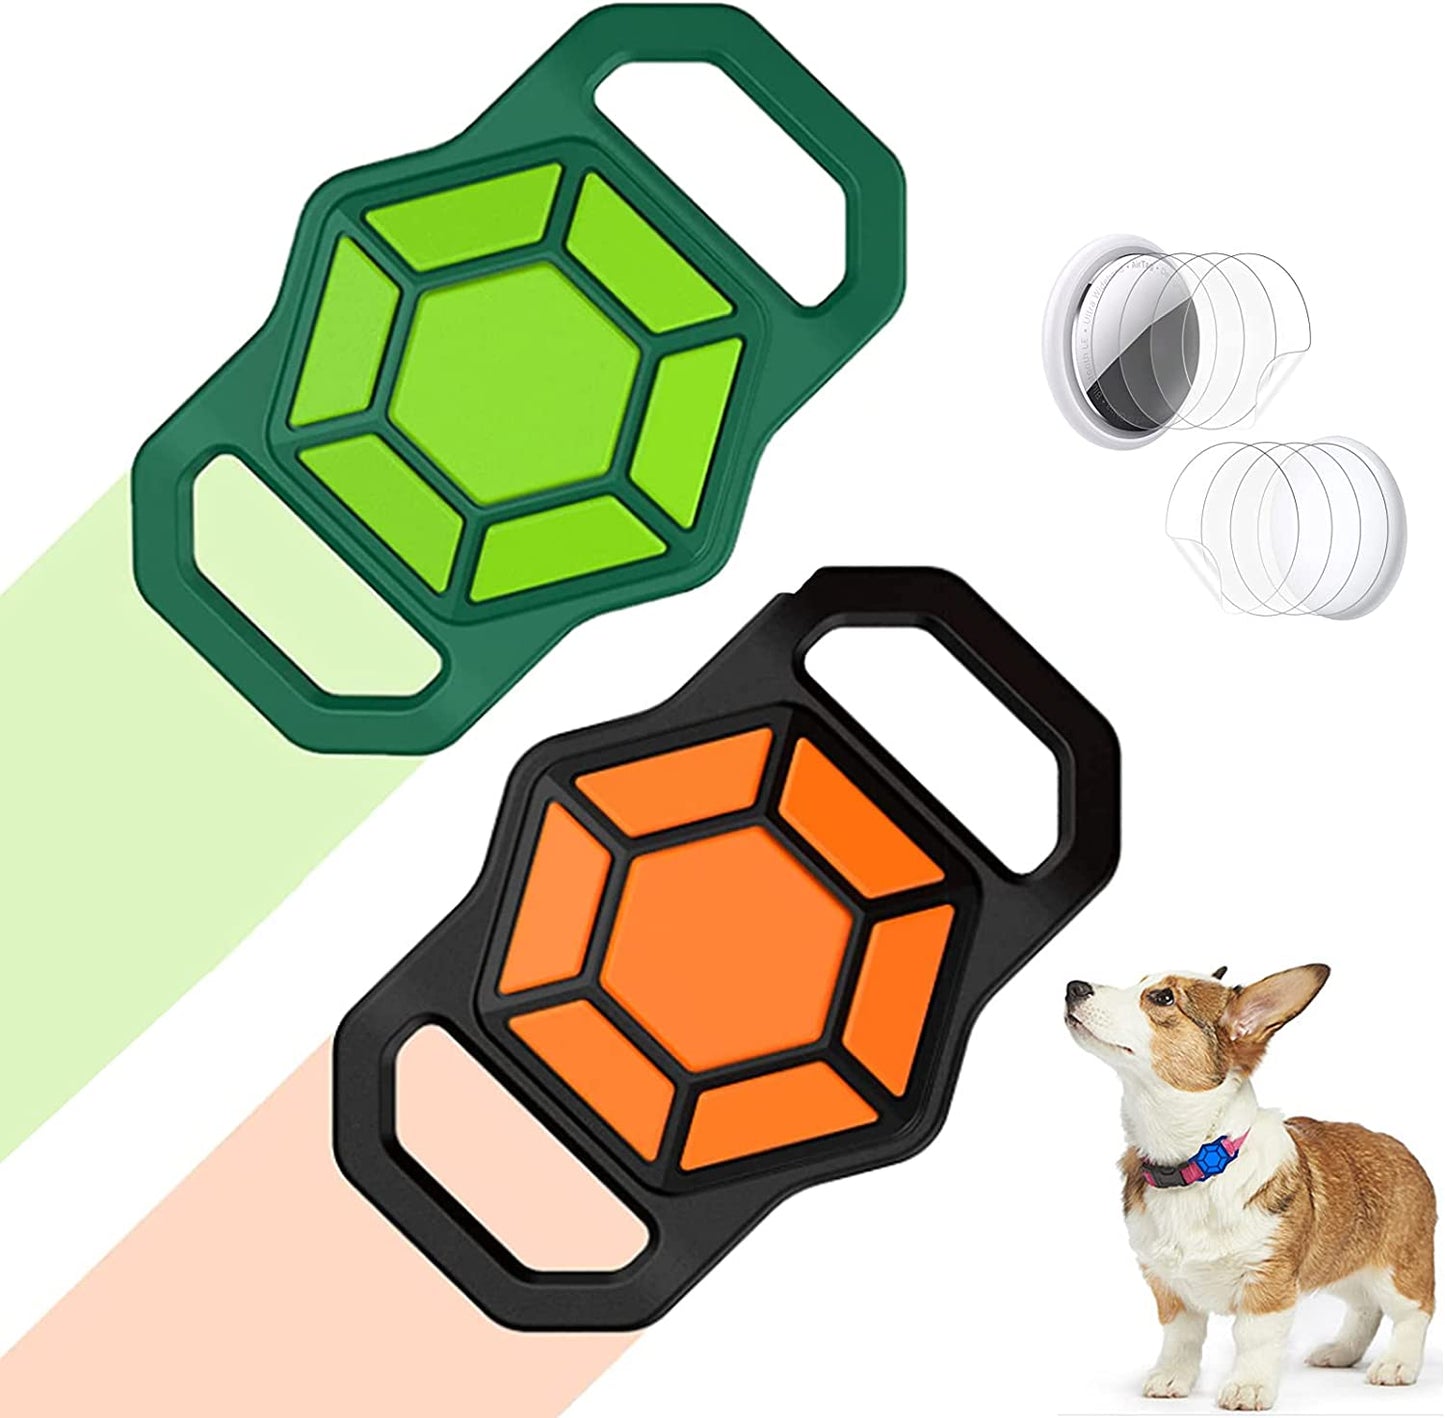 Neotrixqi Airtag Dog Collar Holder, Airtag Holder Accessories for Apple Airtags Tracker with 4 Pack HD Protective Film, Silicone Air Tag Case for Air Tags Pet Collar Loop Necklace Backpack Bag Electronics > GPS Accessories > GPS Cases NeotrixQI BlackOrange Green  